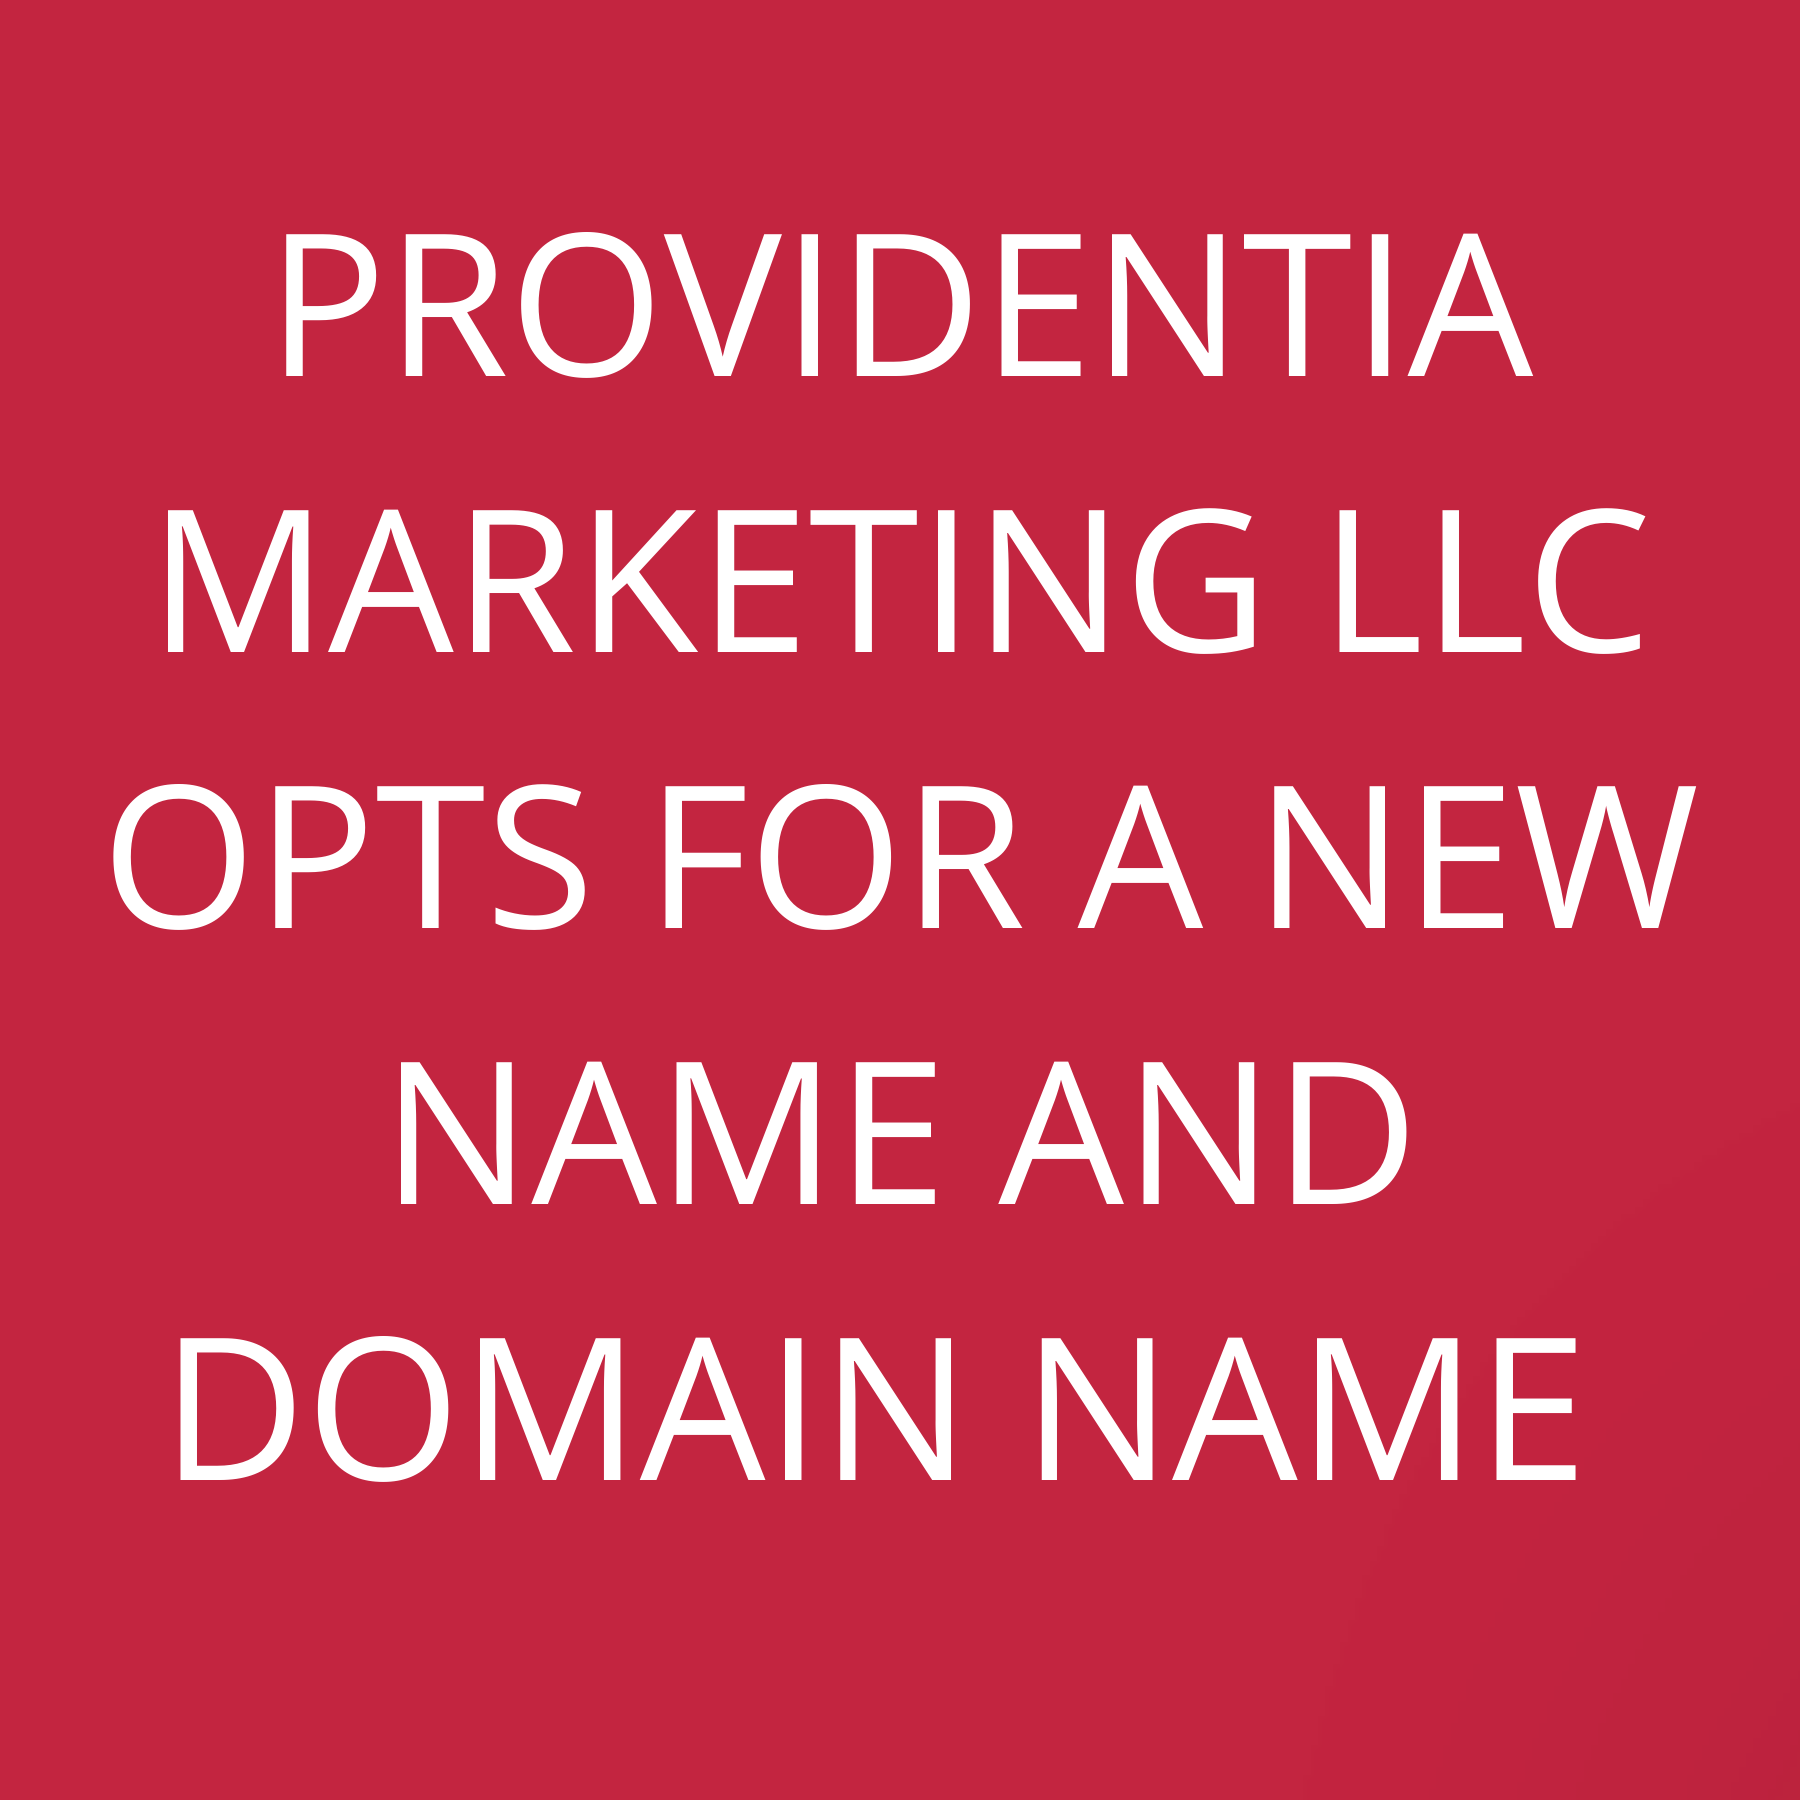 Providentia Marketing LLC opts for a new name and domain name